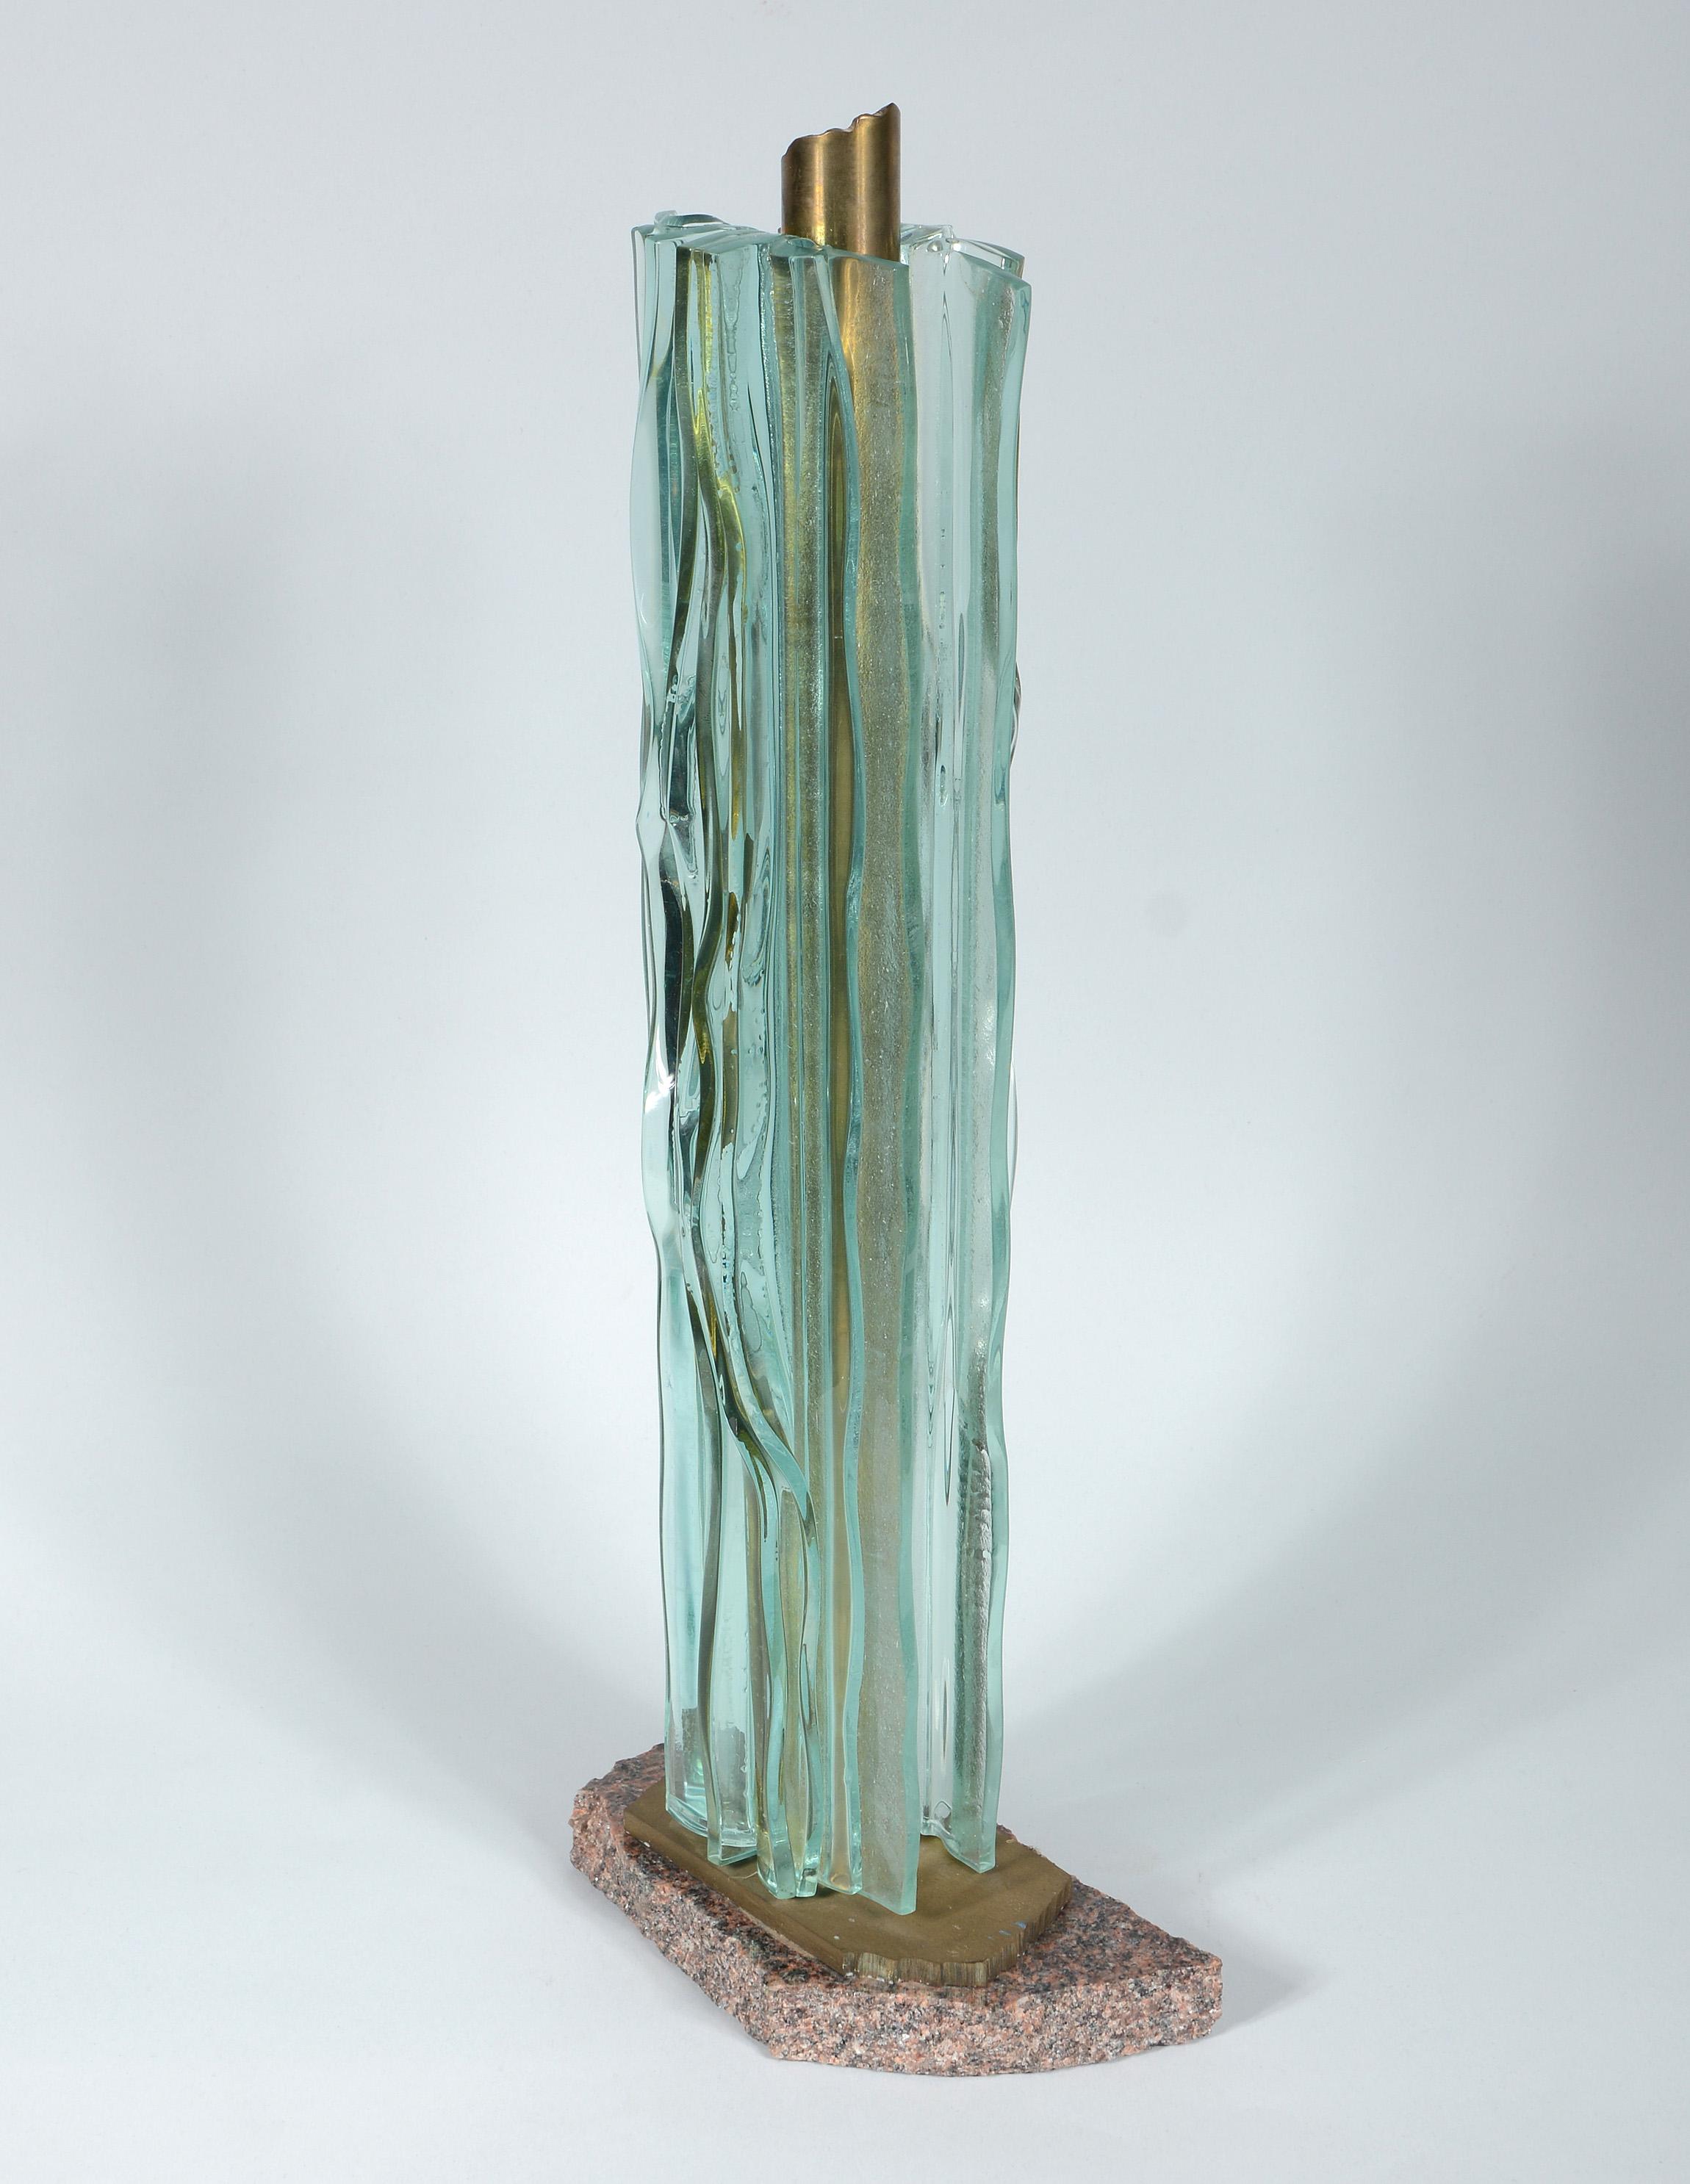 North American Fused Glass and Bronze Sculpture by Nancy Mee